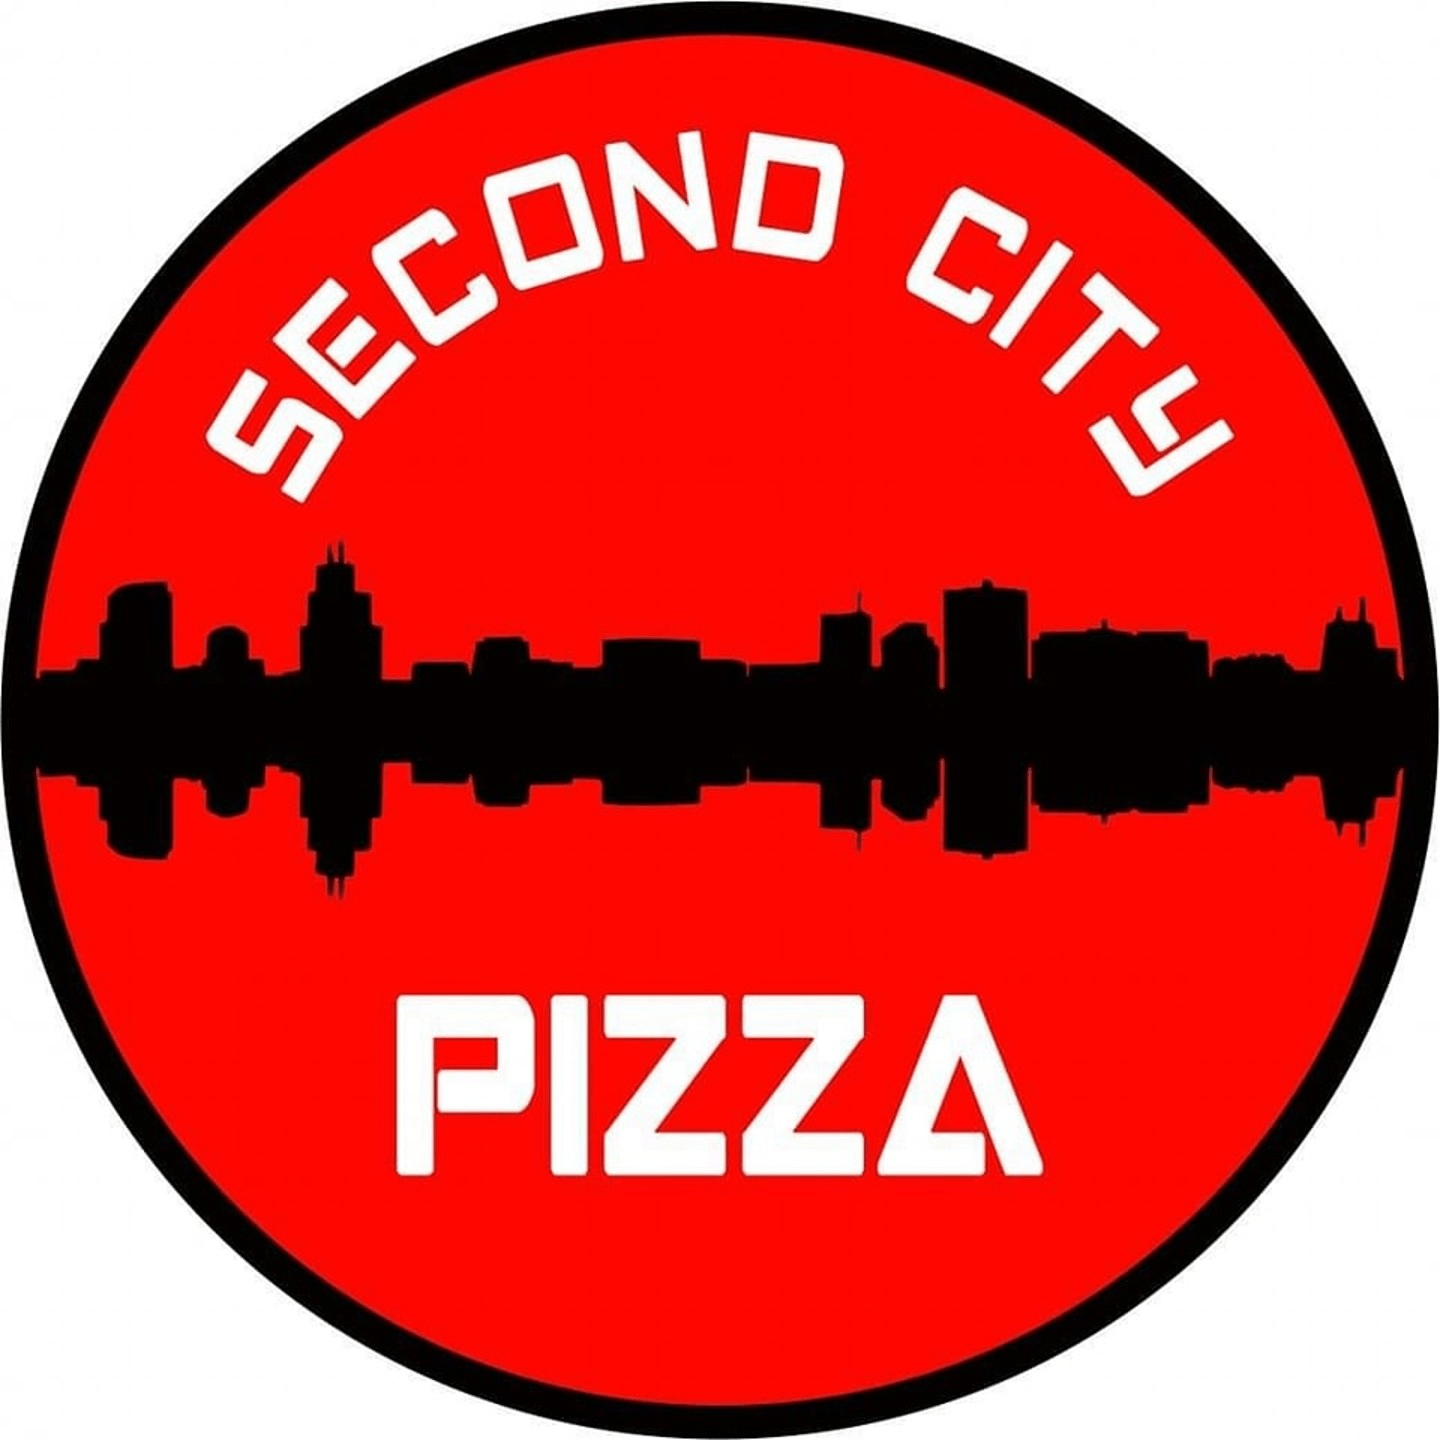 Welcome to Second City Pizza! 